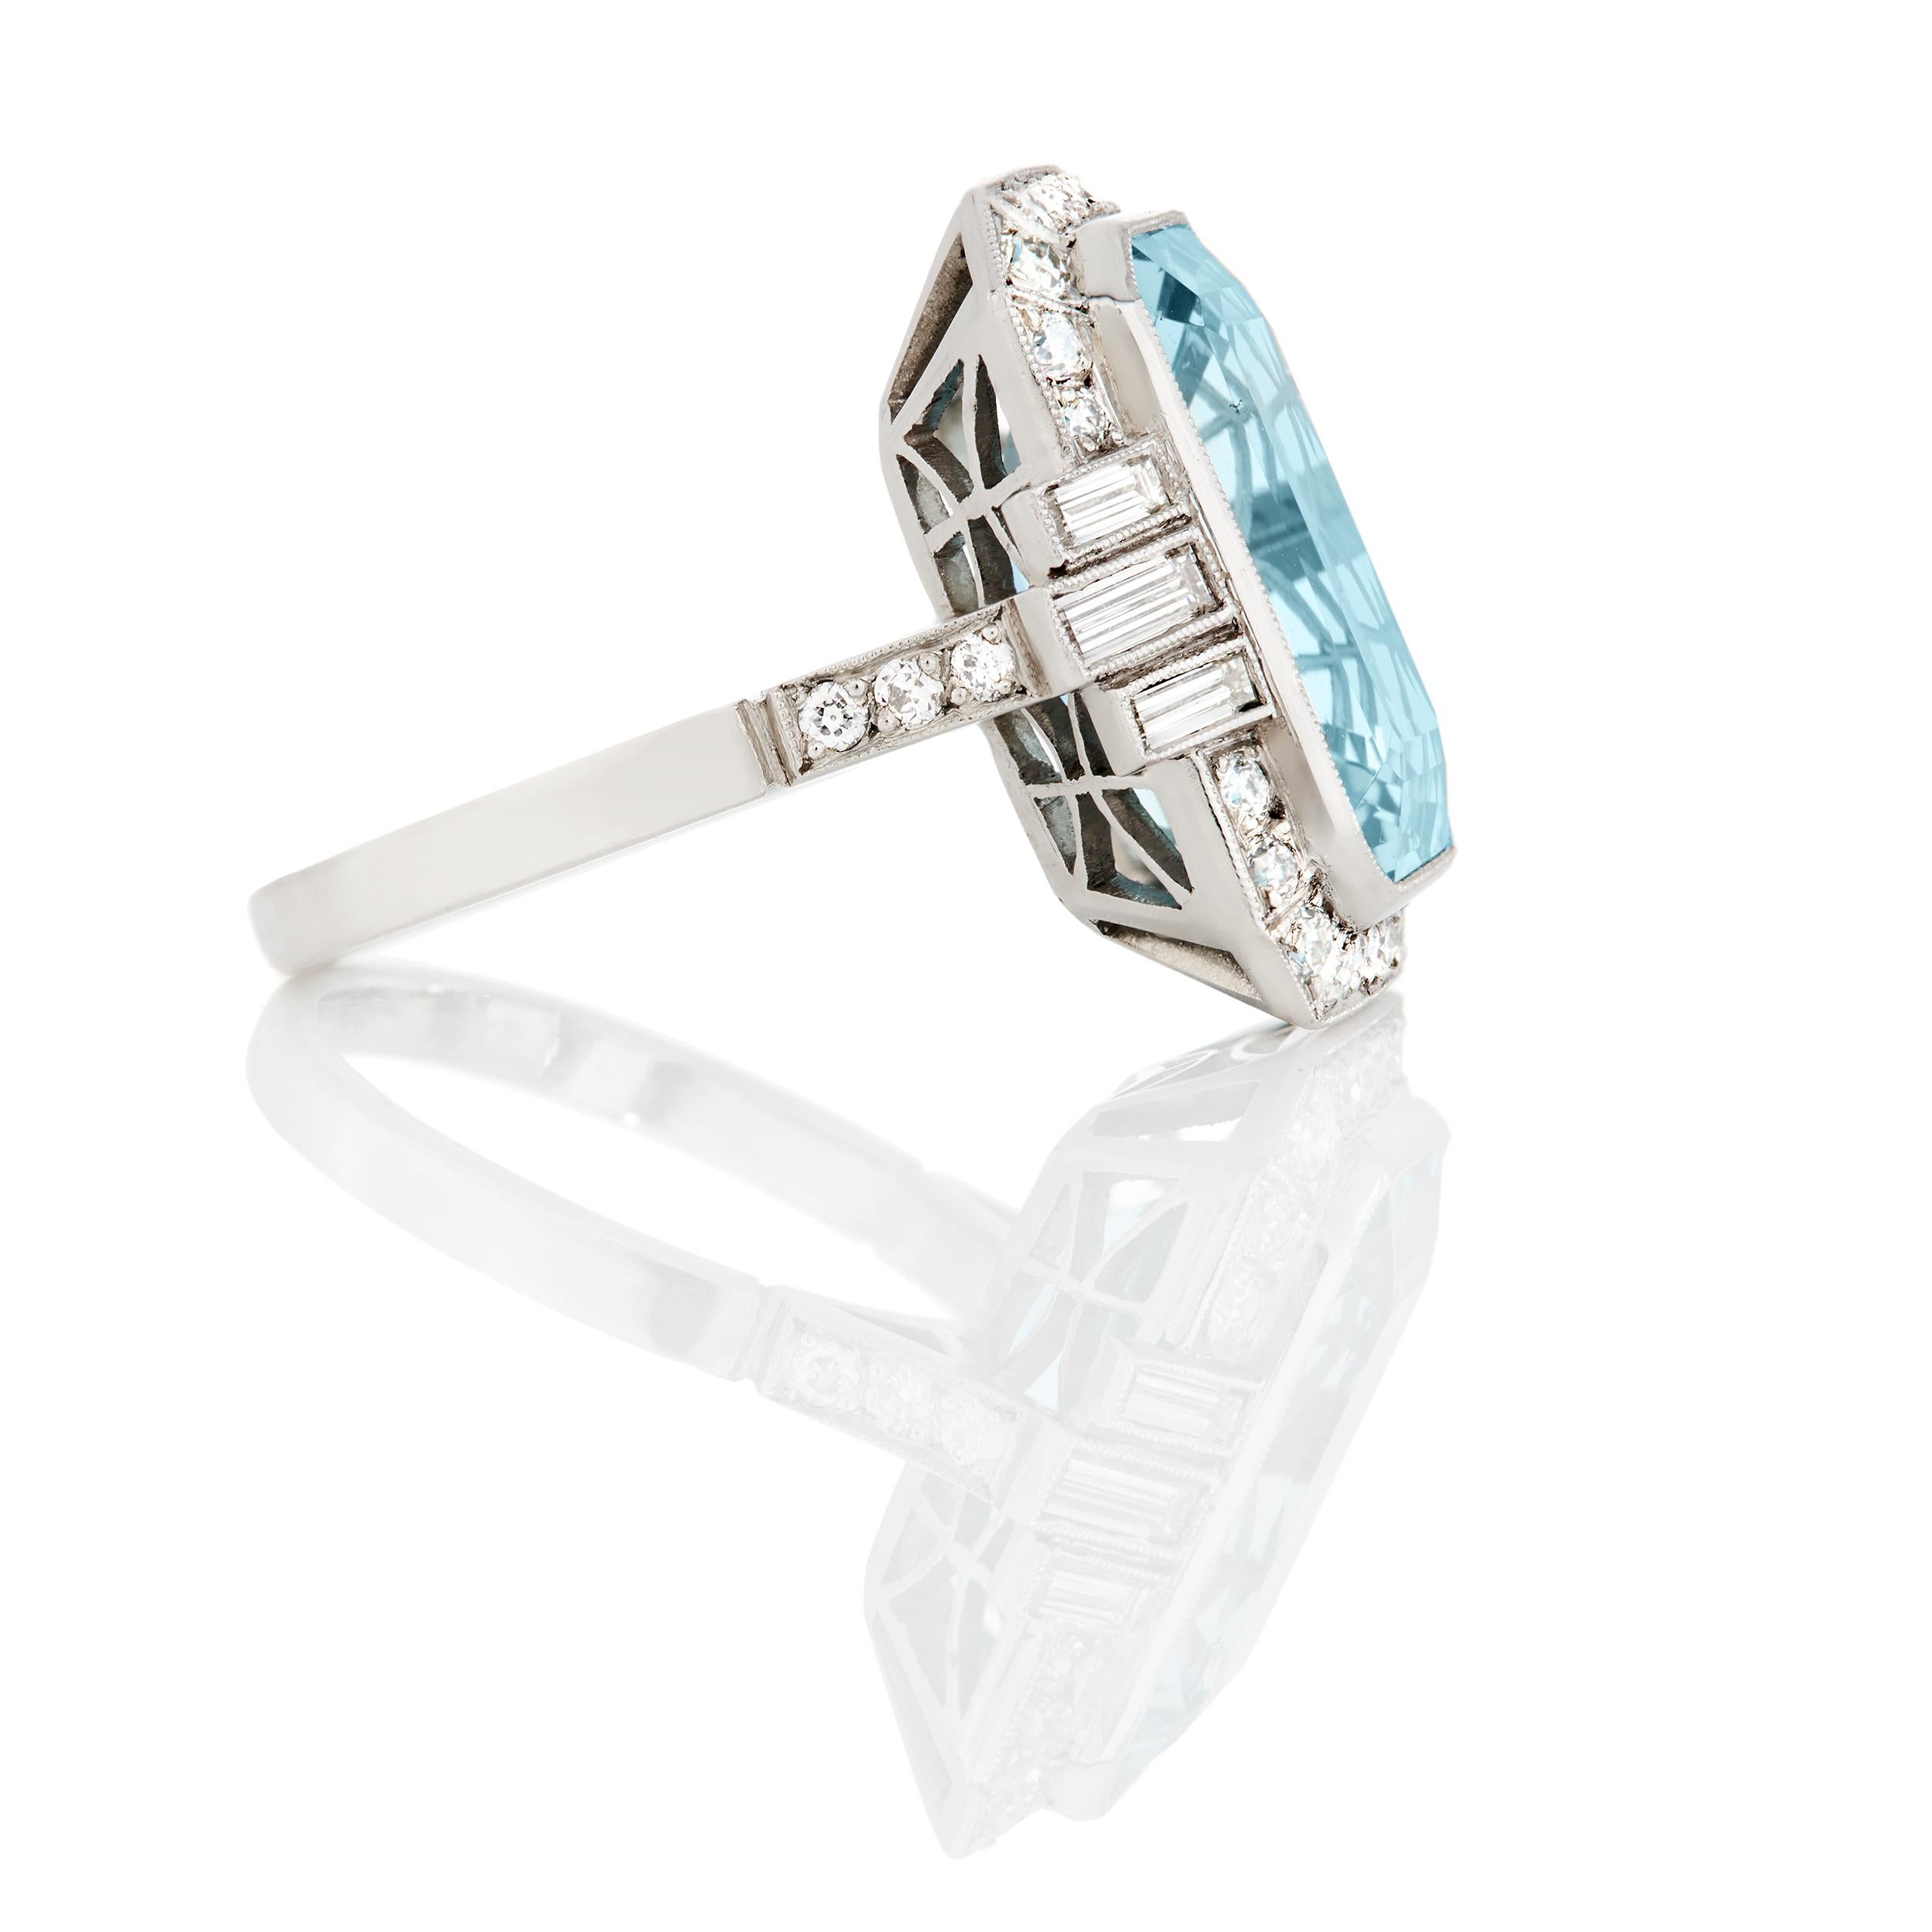 Overall Description:

9.96 Carats Aquamarine
     •Emerald Cut

1.0 Carats Diamond
     •6 Baguette
     •28 Round Brilliant 

Ring Size: 7
*Can be resizable* 

Length: 26.2 mm
Width: 20.65 mm
Weight: 10 grams